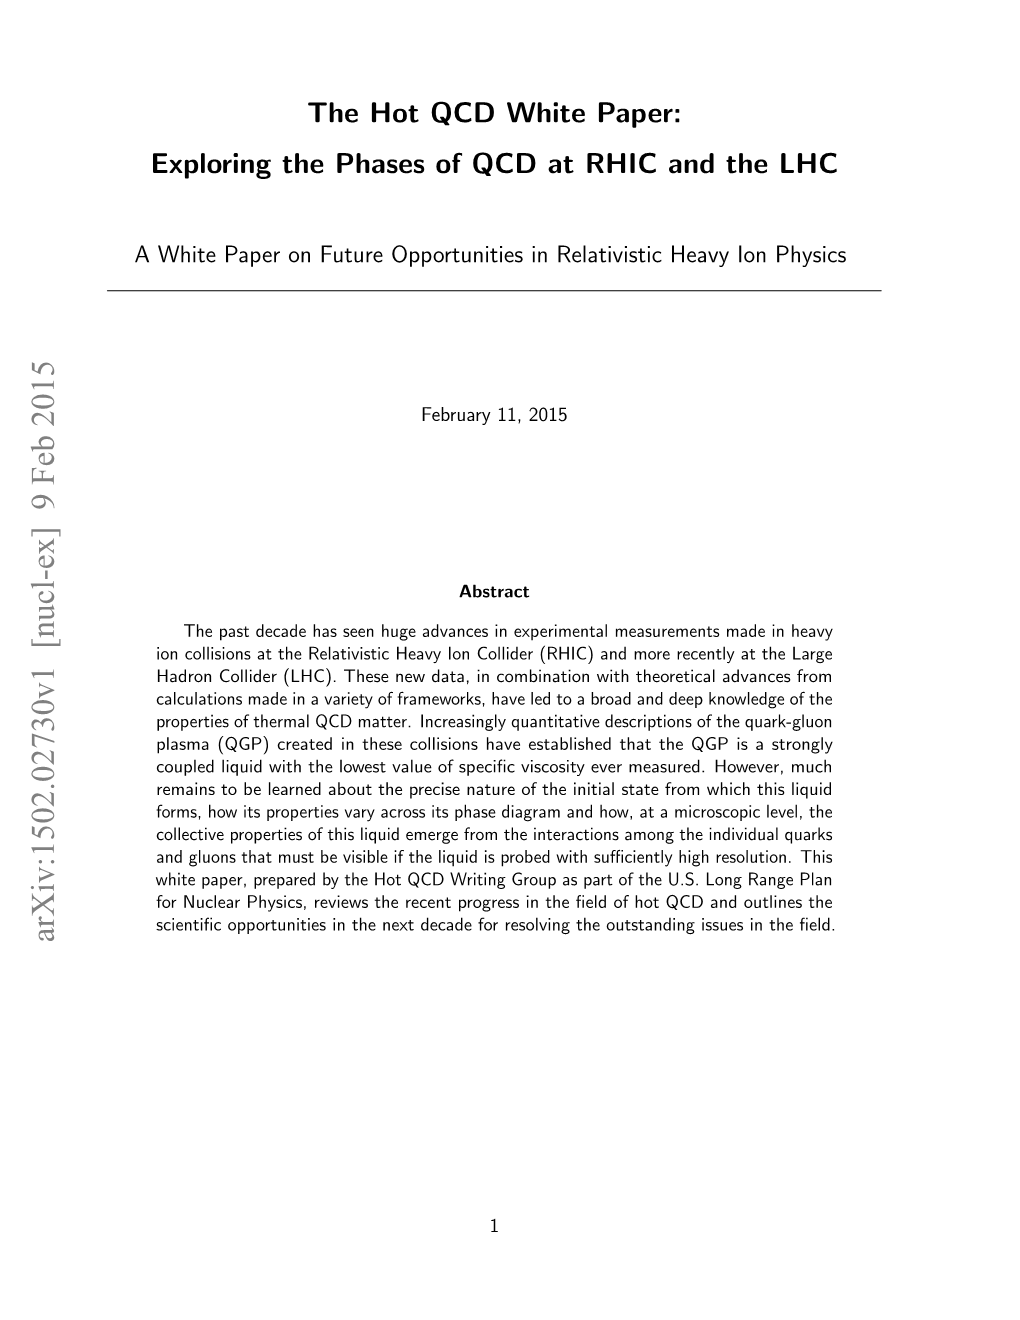 Exploring the Phases of QCD at RHIC and the LHC